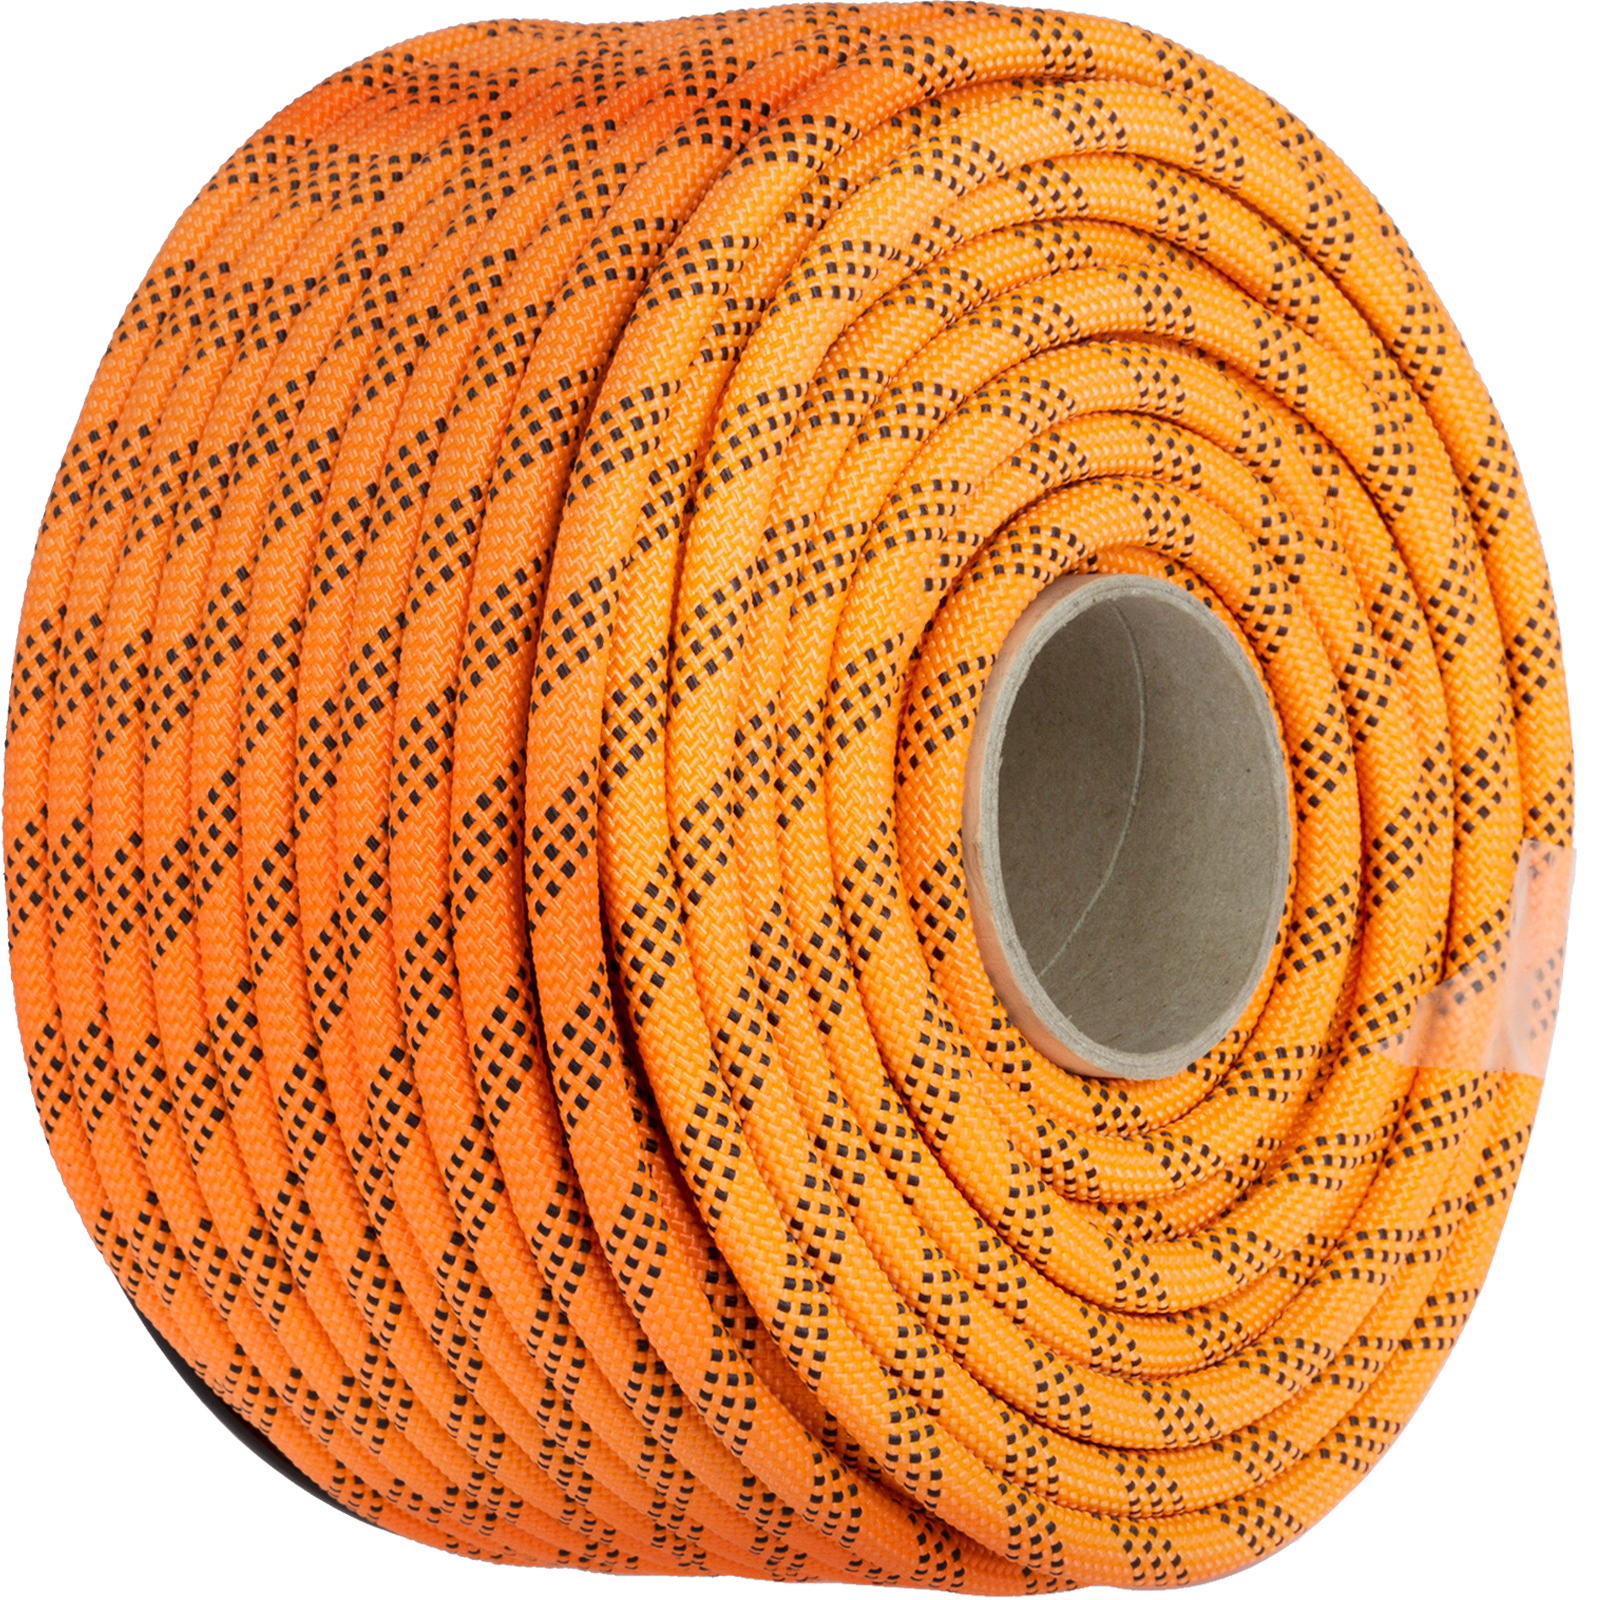 100 FT Double Braid Polyester Rope 9/16" Rigging Rope 8600lbs Breaking Strength 